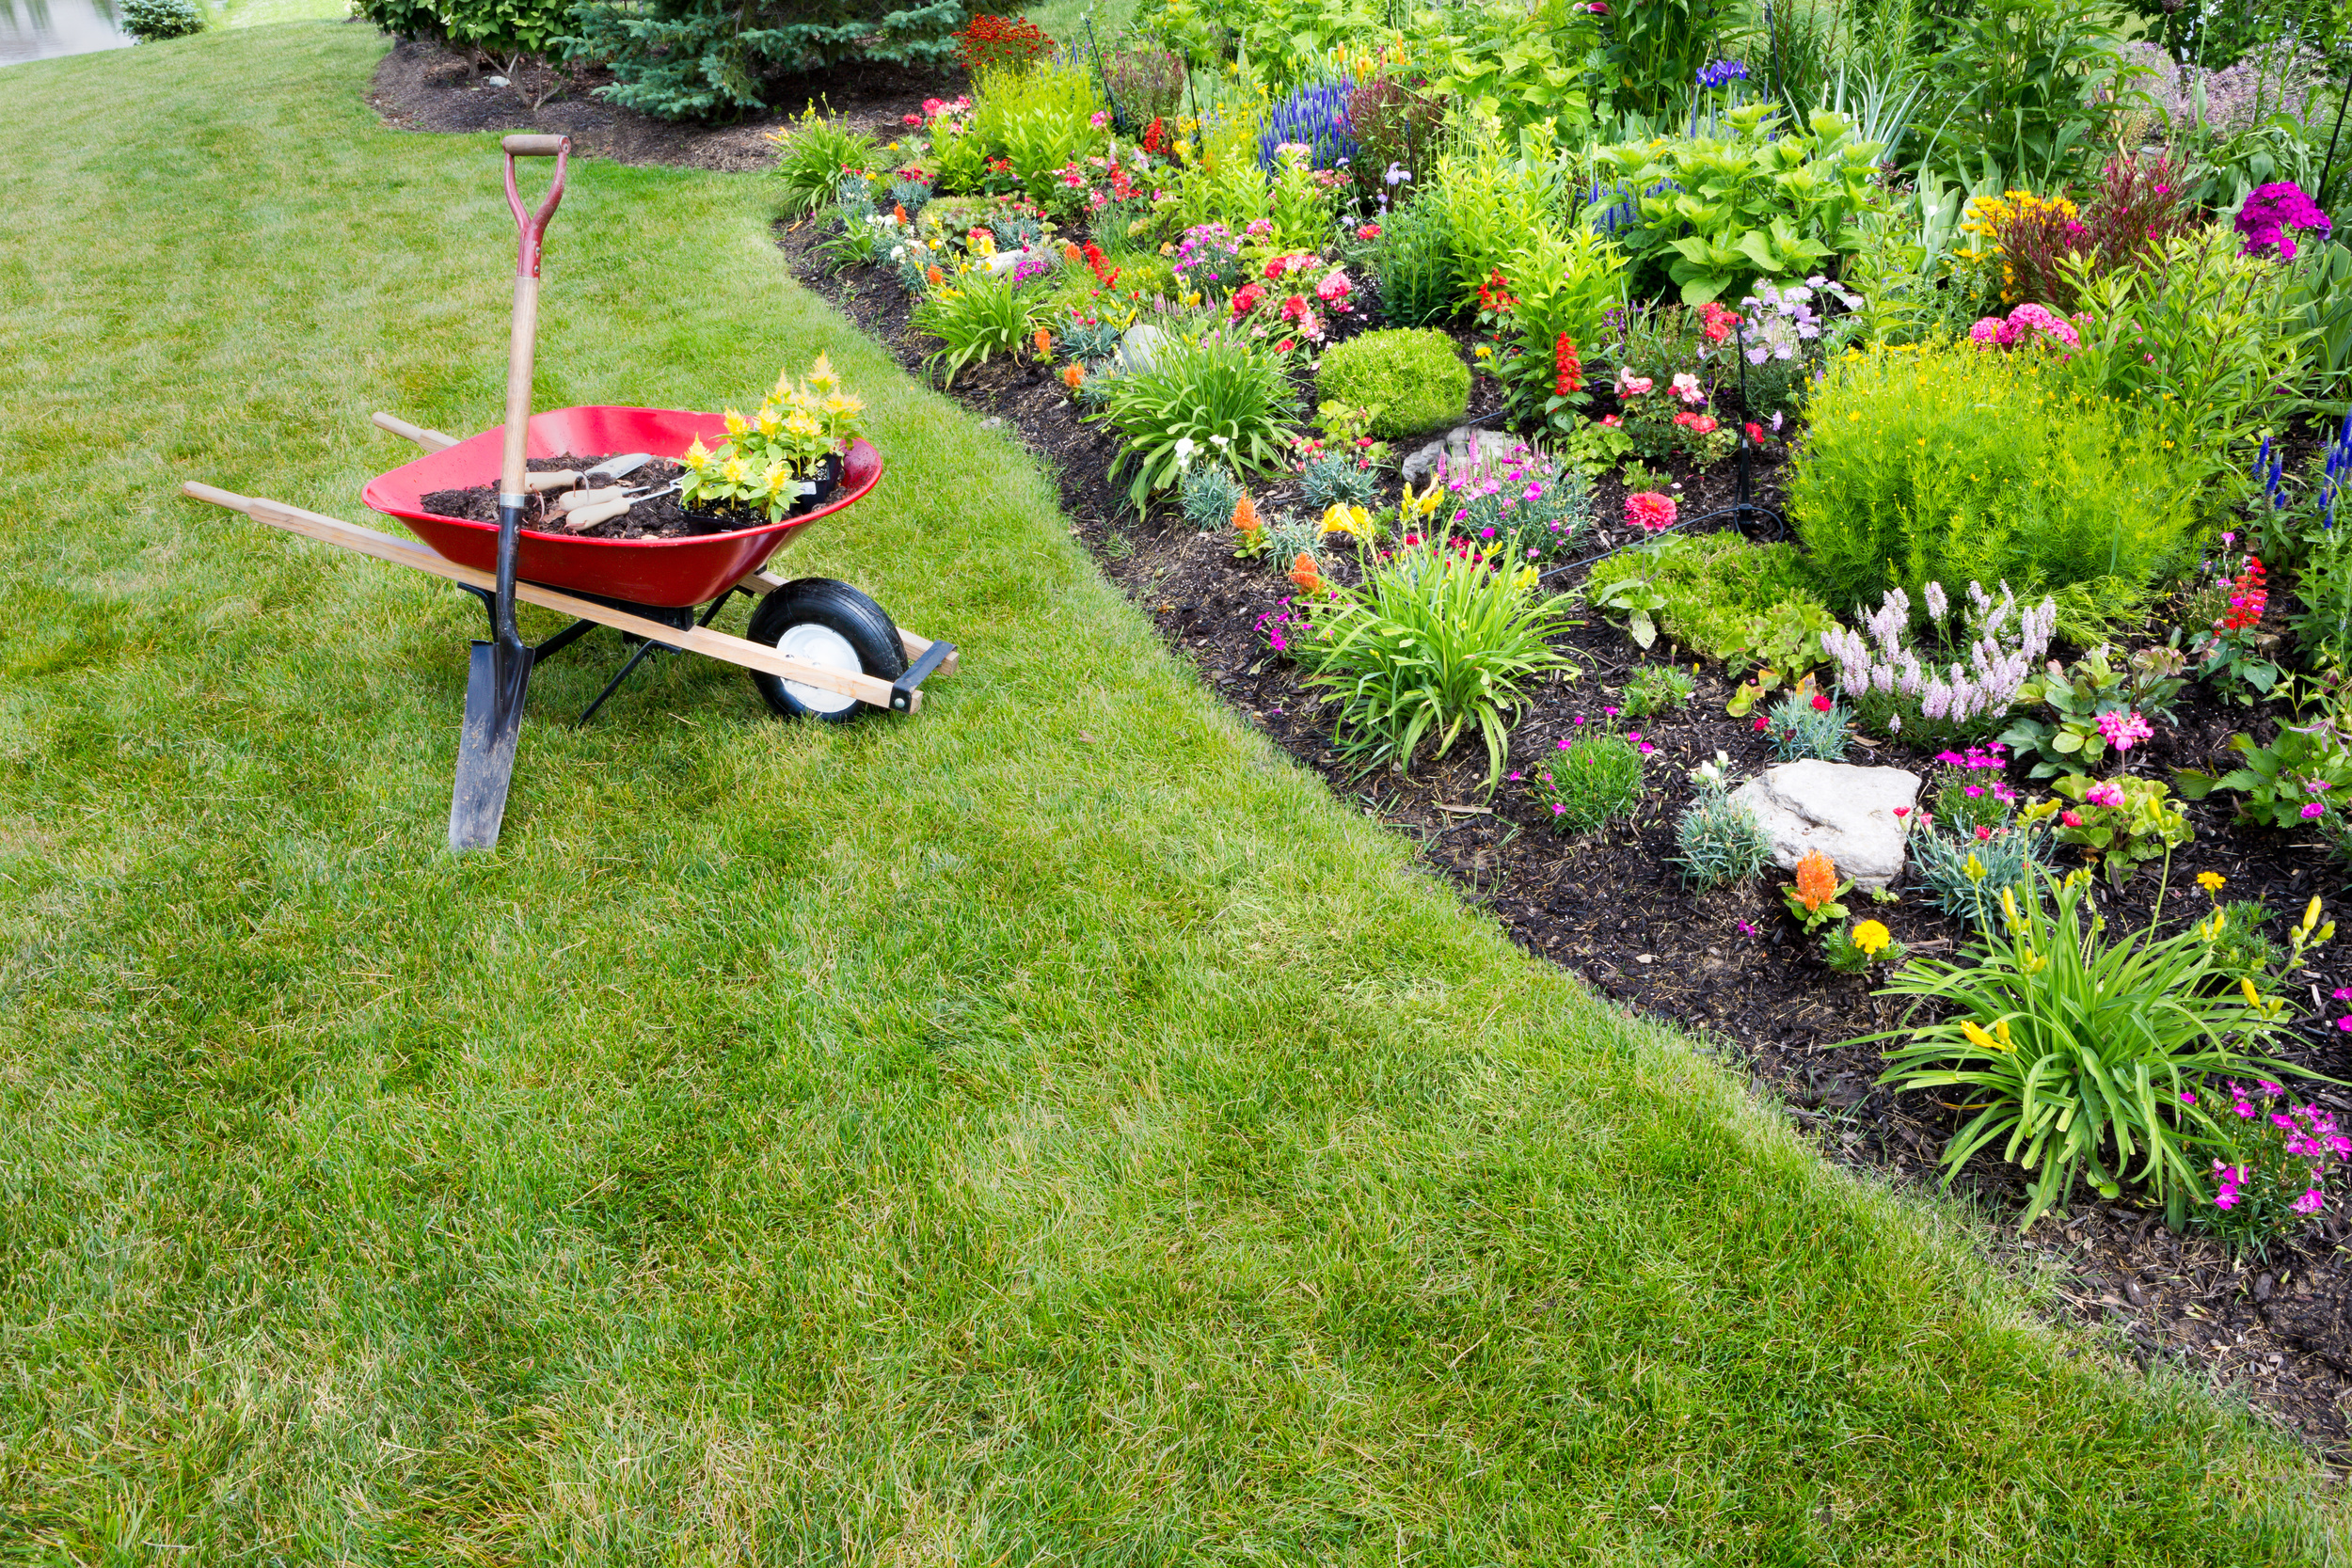   Your Redding Lawn Care Experts    Contact Us  